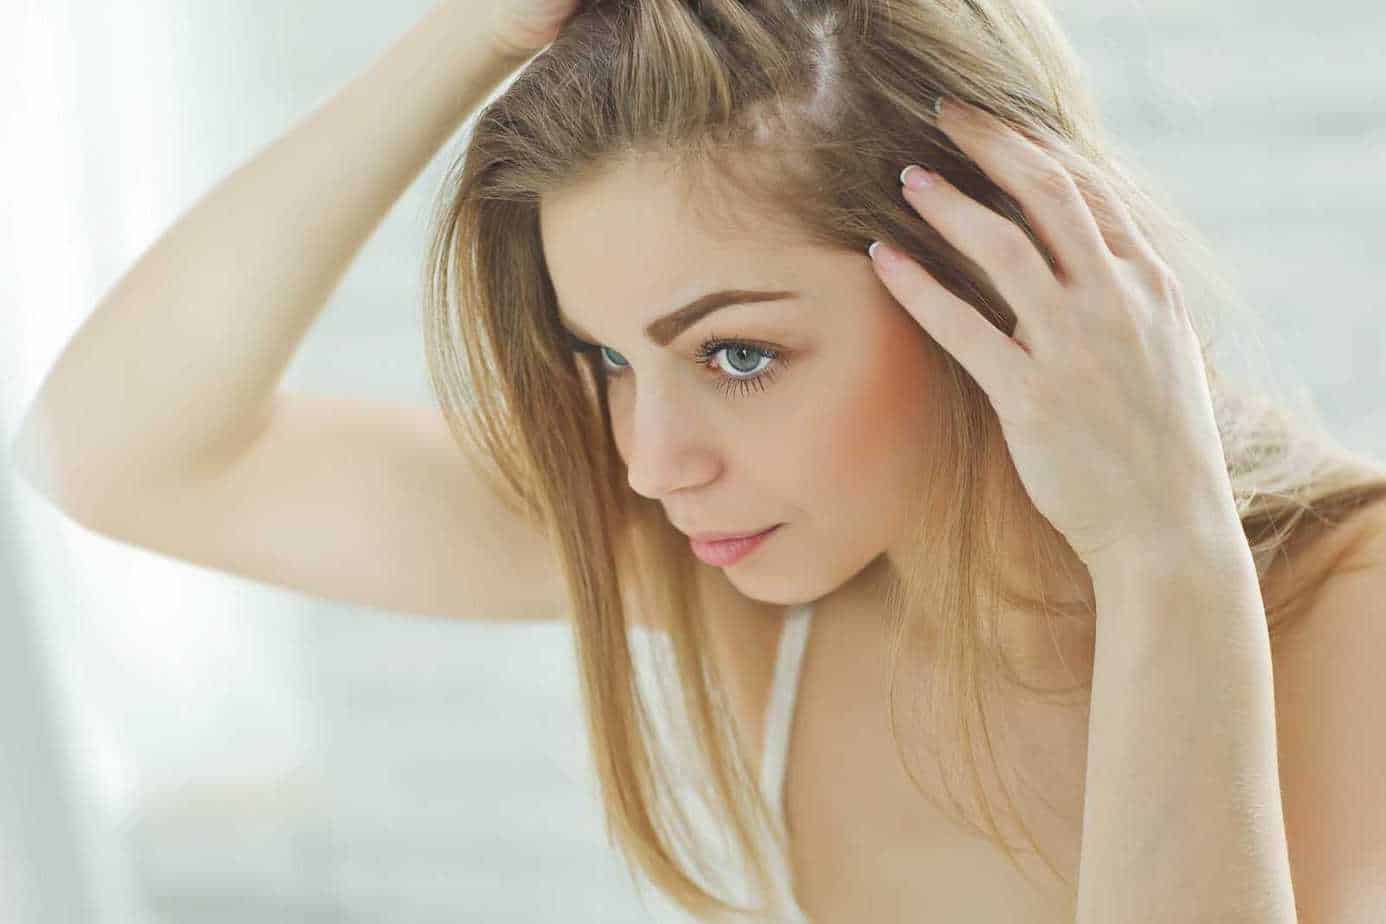 hair loss causes, prevention and treatment